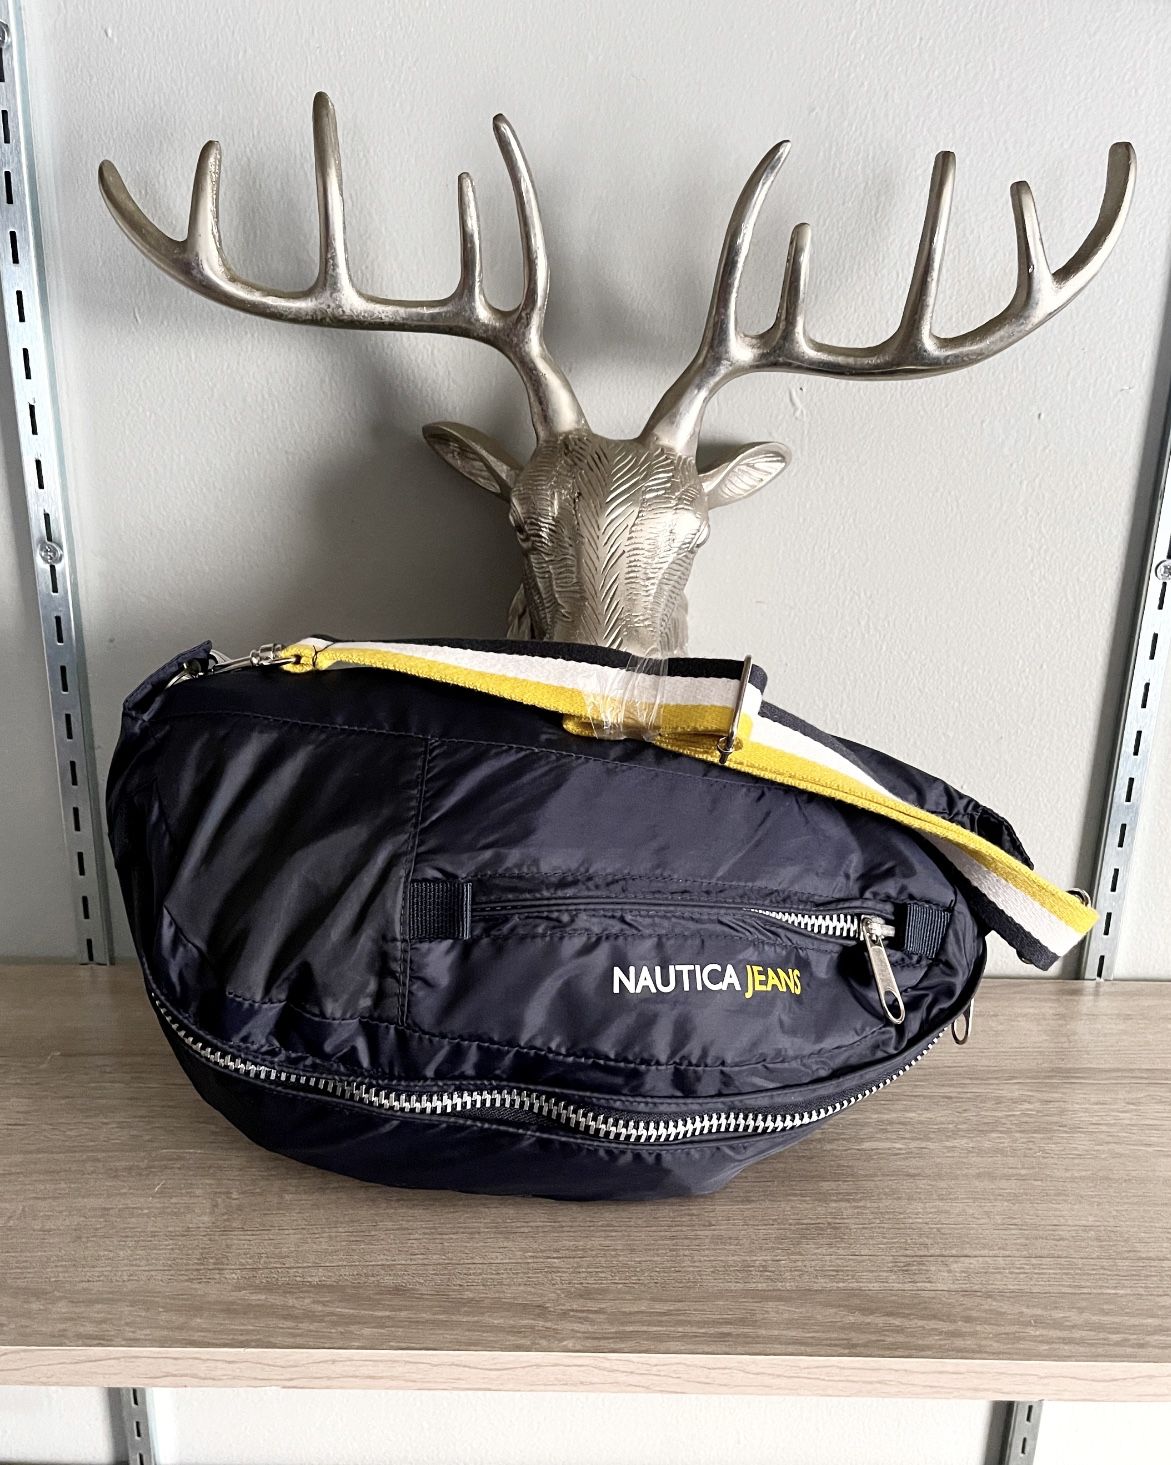 New! Mens Nautica Holabag Messenger crossbody sling bag. Retail $38. Fabrics 100% Nylon, with Removable strap. Measures 21in, 15in 